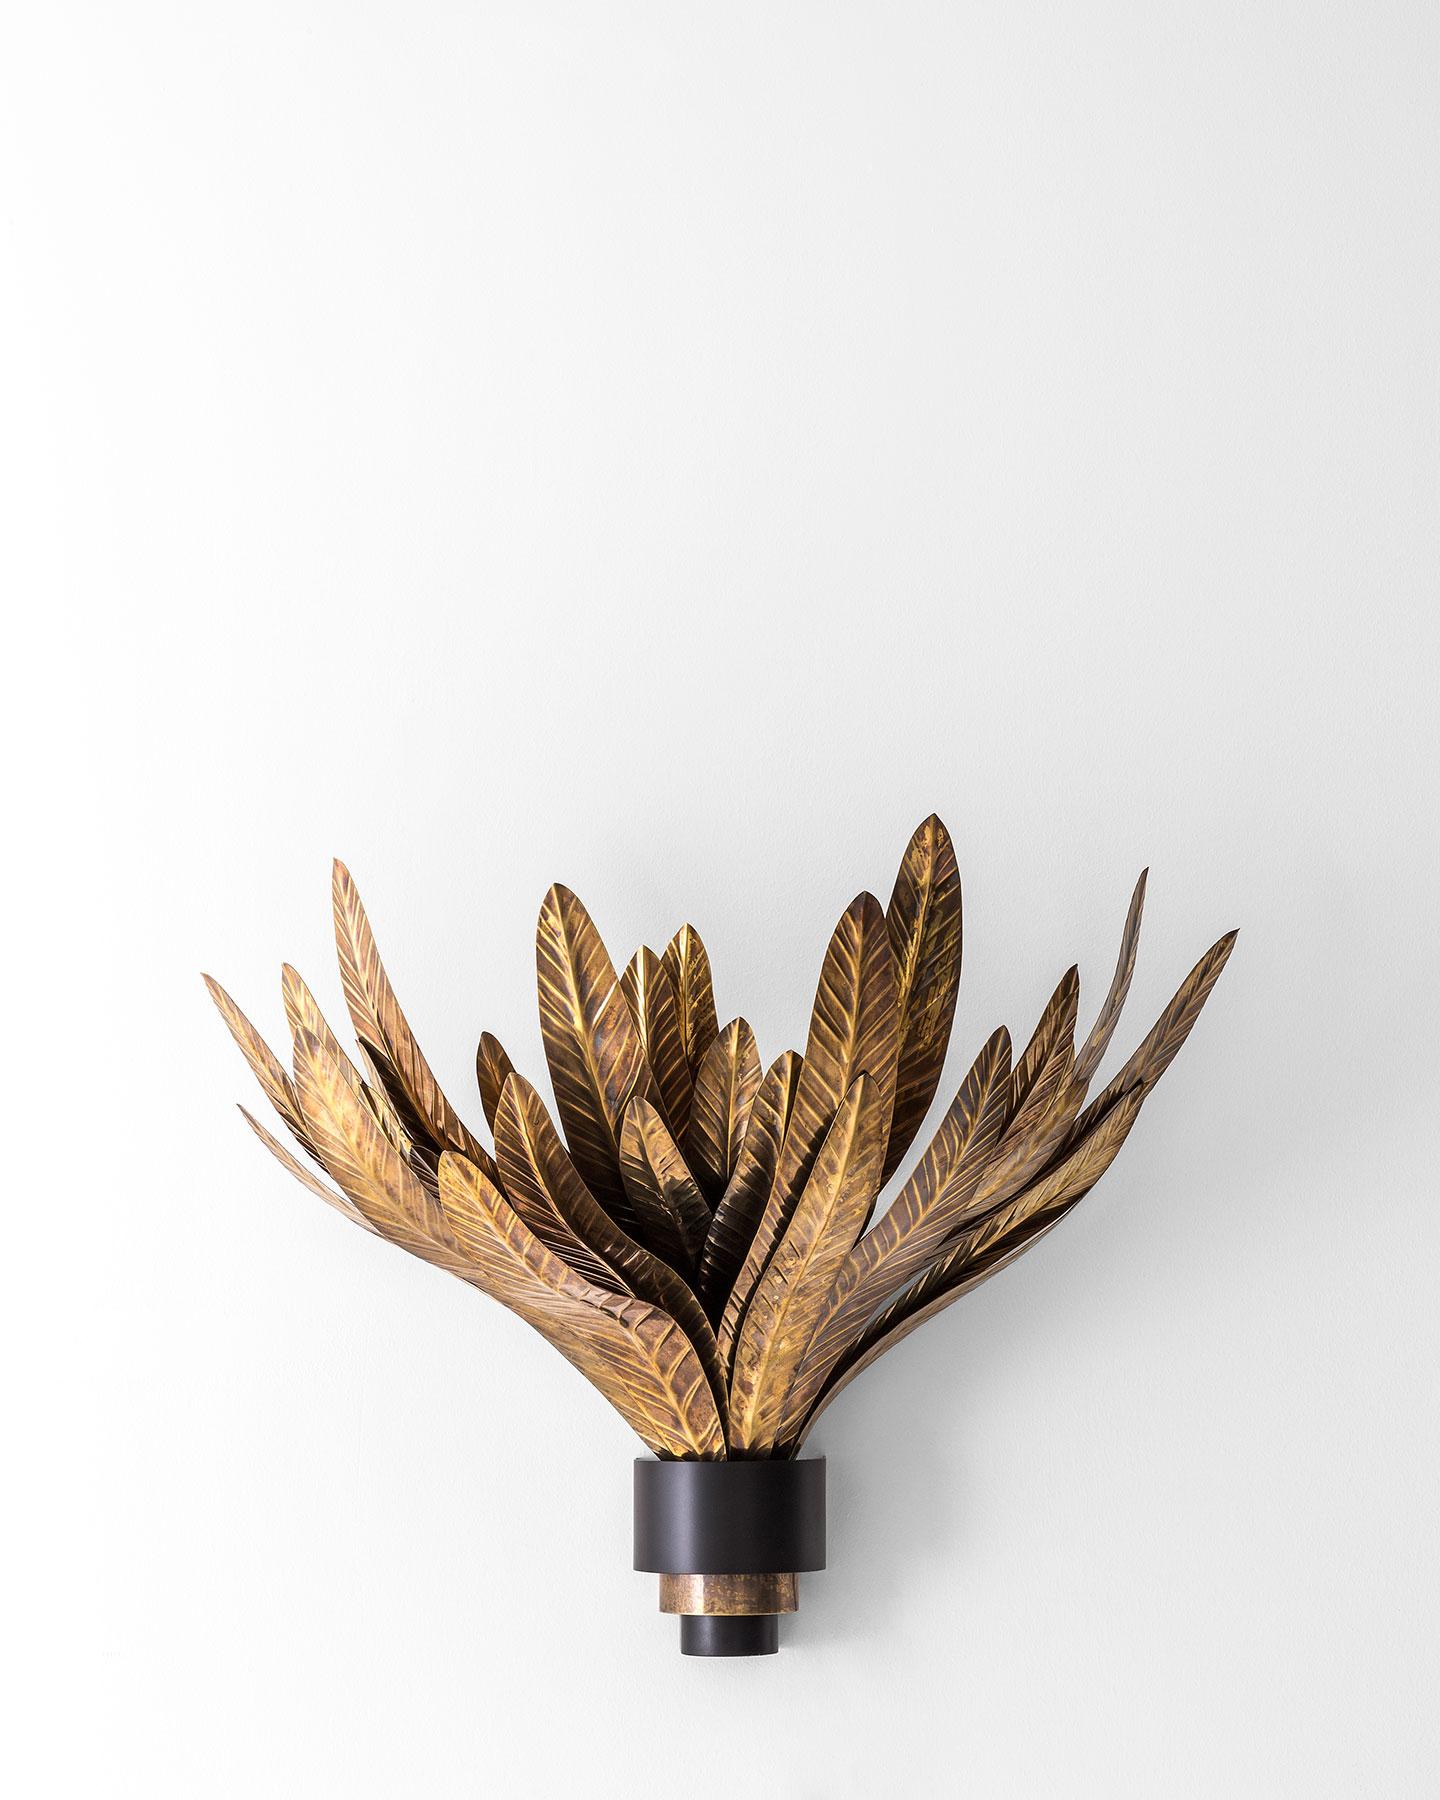 Wall lamp in matte black painted brass and polished oxidized brass details.
Handcraft decorative leaves in polished oxidized brass.
Progetto Non Finito collection from Dimoremilano, designed by Dimorestudio.
code: LAMPADA049
22% VAT WILL BE ADDED ON